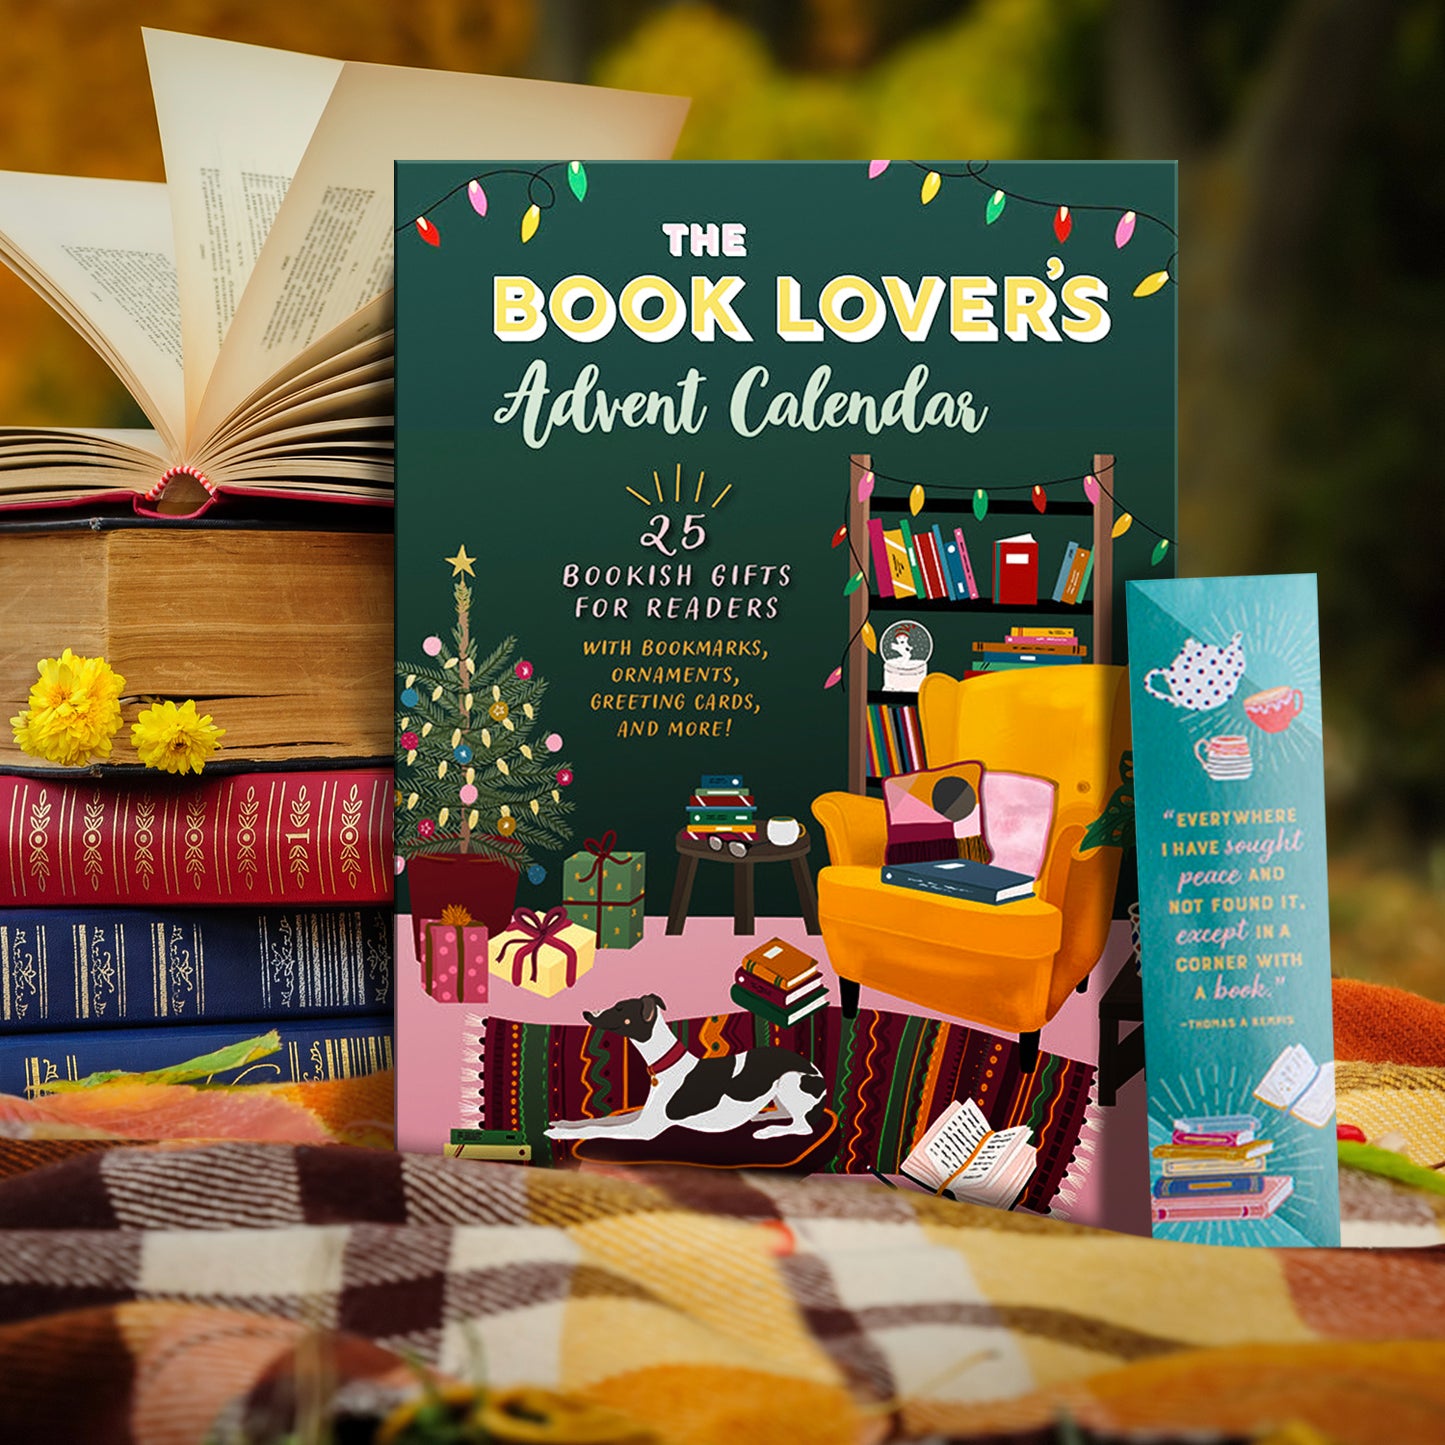 A green book on a plaid blanket, next to a stack of books.. At the top of the cover is pink, green, and yellow text saying "The Book Lover's Advent Calendar," against a green background. At the middle and bottom of the cover is a drawing of a living room decorated for Christmas. Books are piled on a yellow chair, the floor, on a brown bookcase, and on a small table. A dog lays on a pillow on the floor.